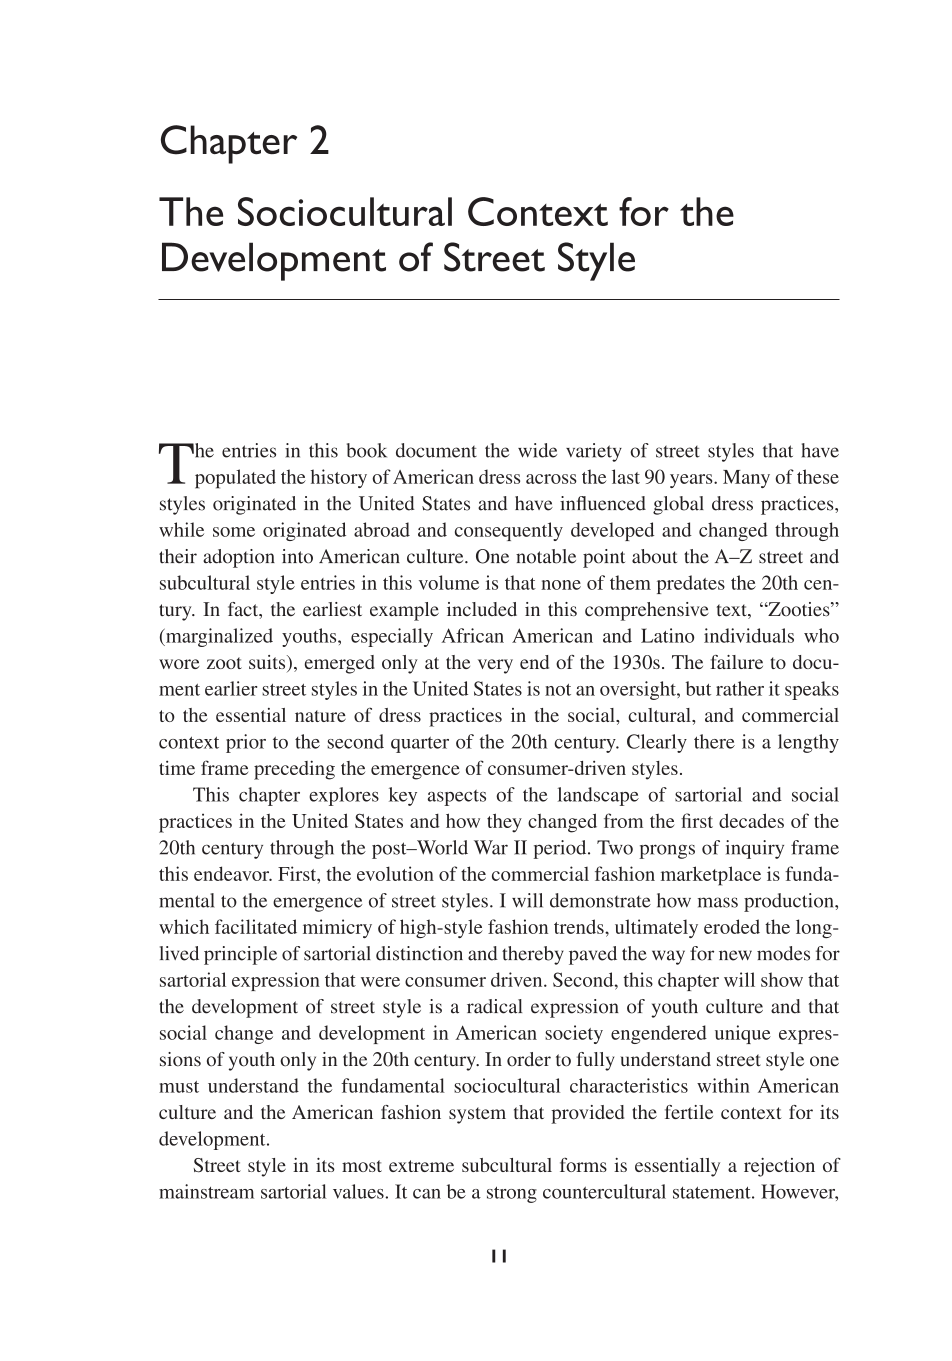 Street Style in America: An Exploration page 11